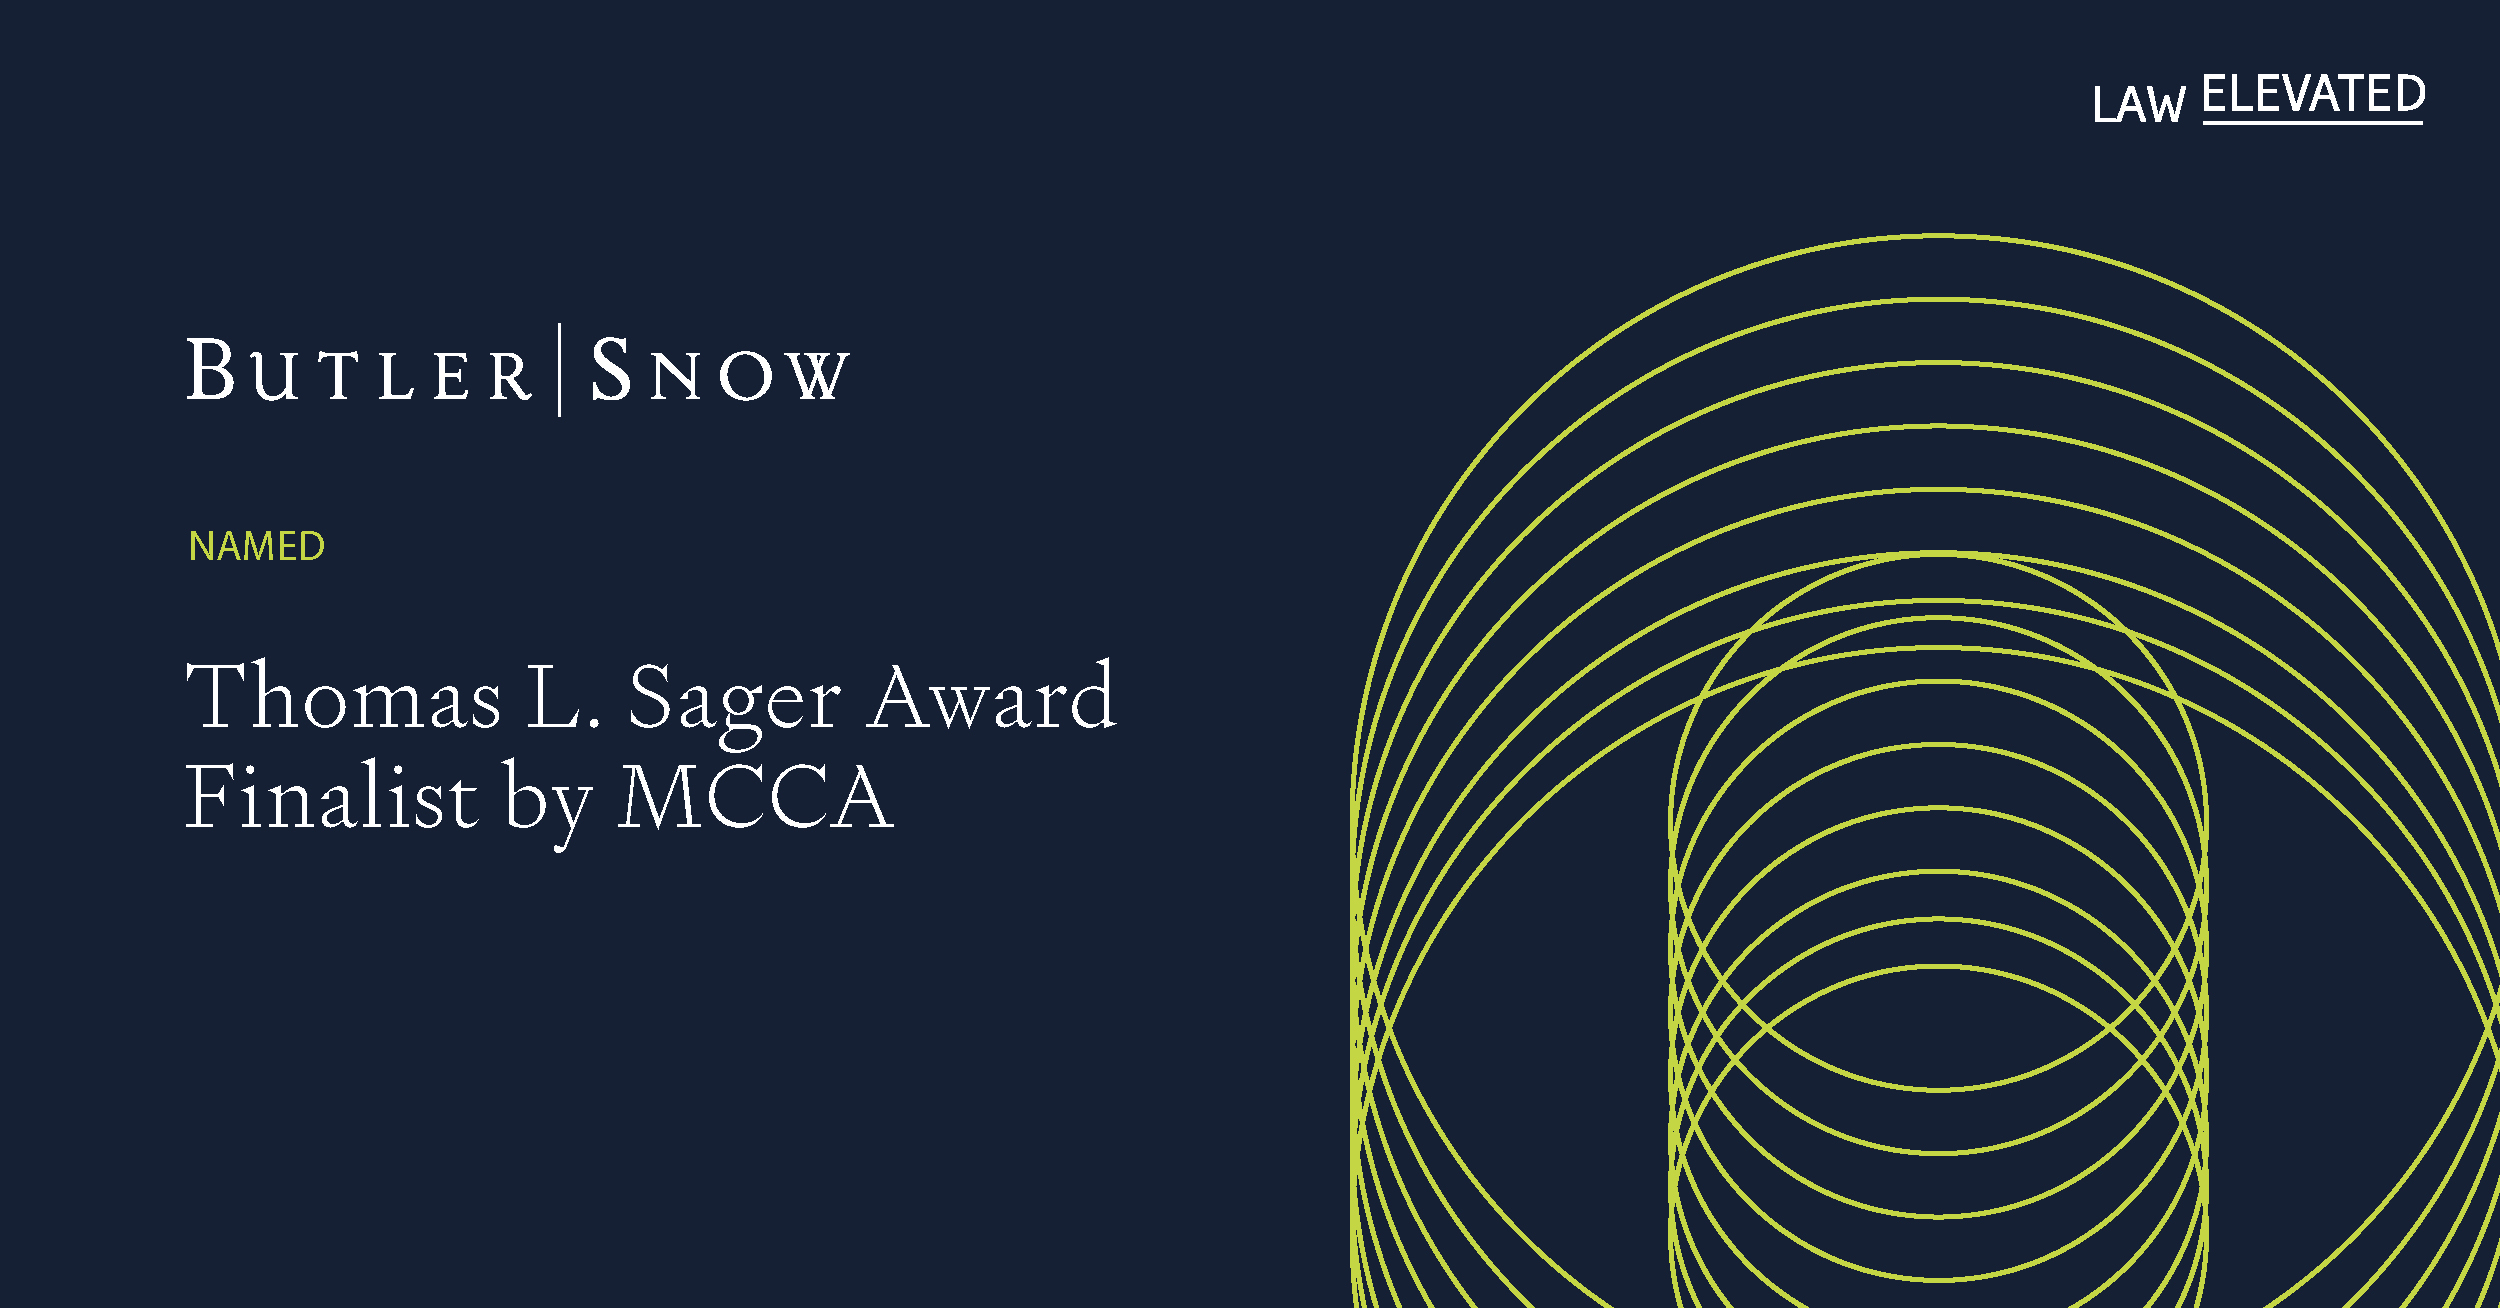 Butler Snow Named Thomas L. Sager Award Finalist by MCCA